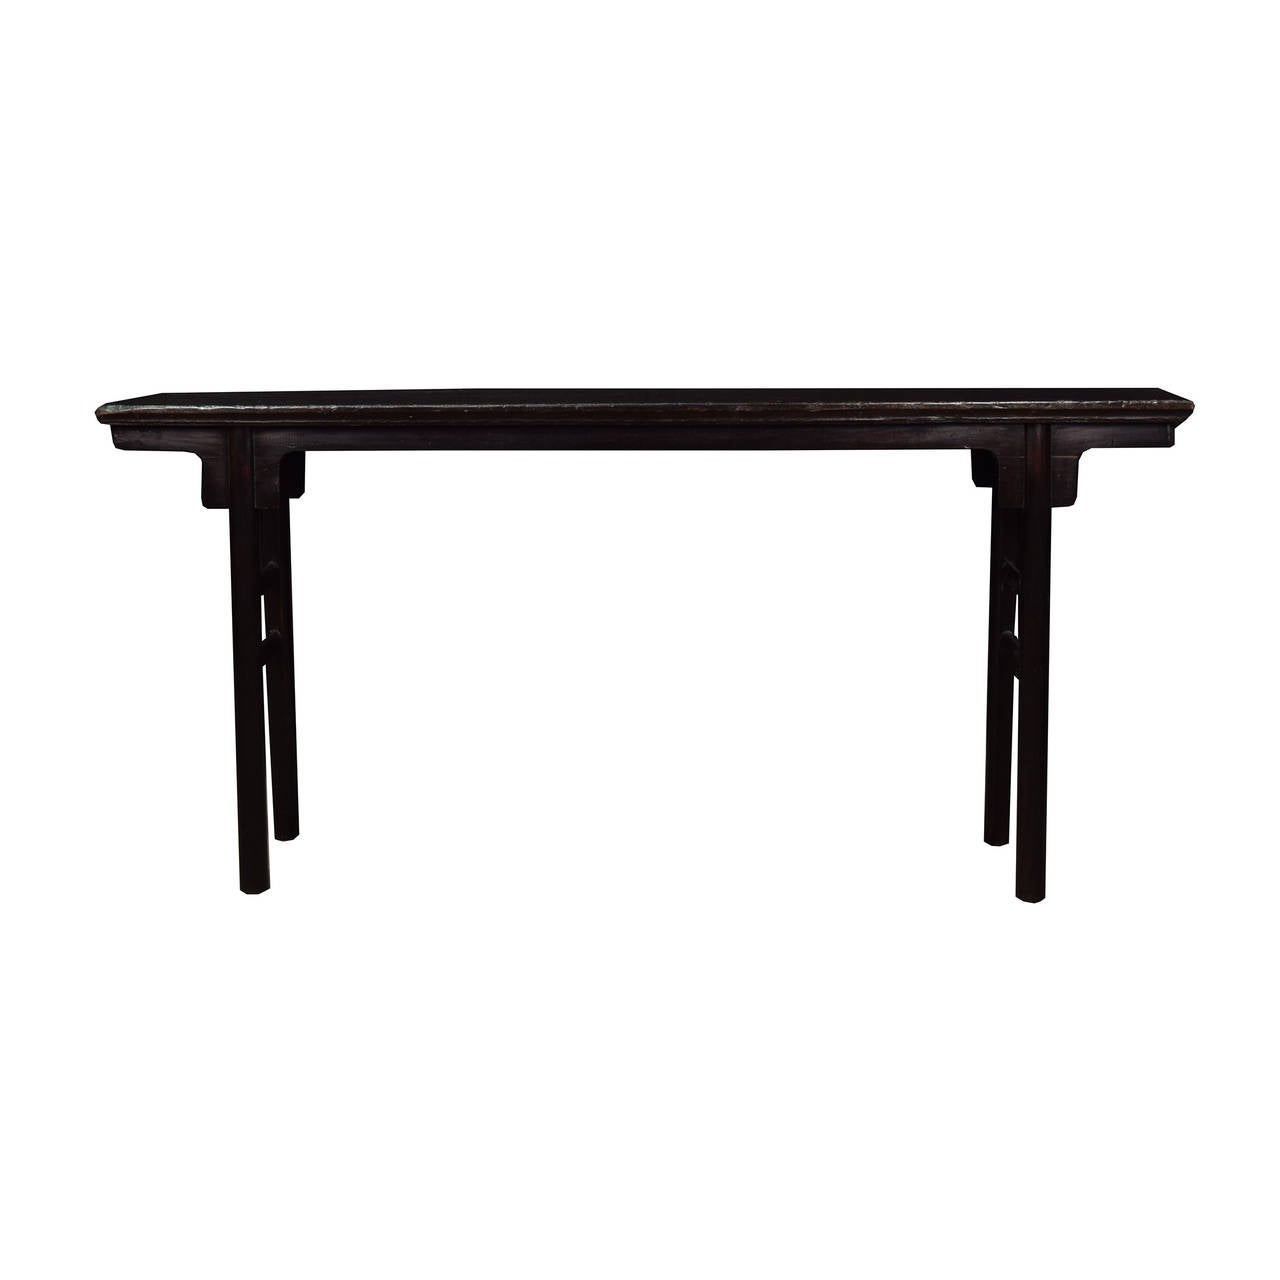 Qing 19th Century Chinese Shallow Altar Table with Inset Legs